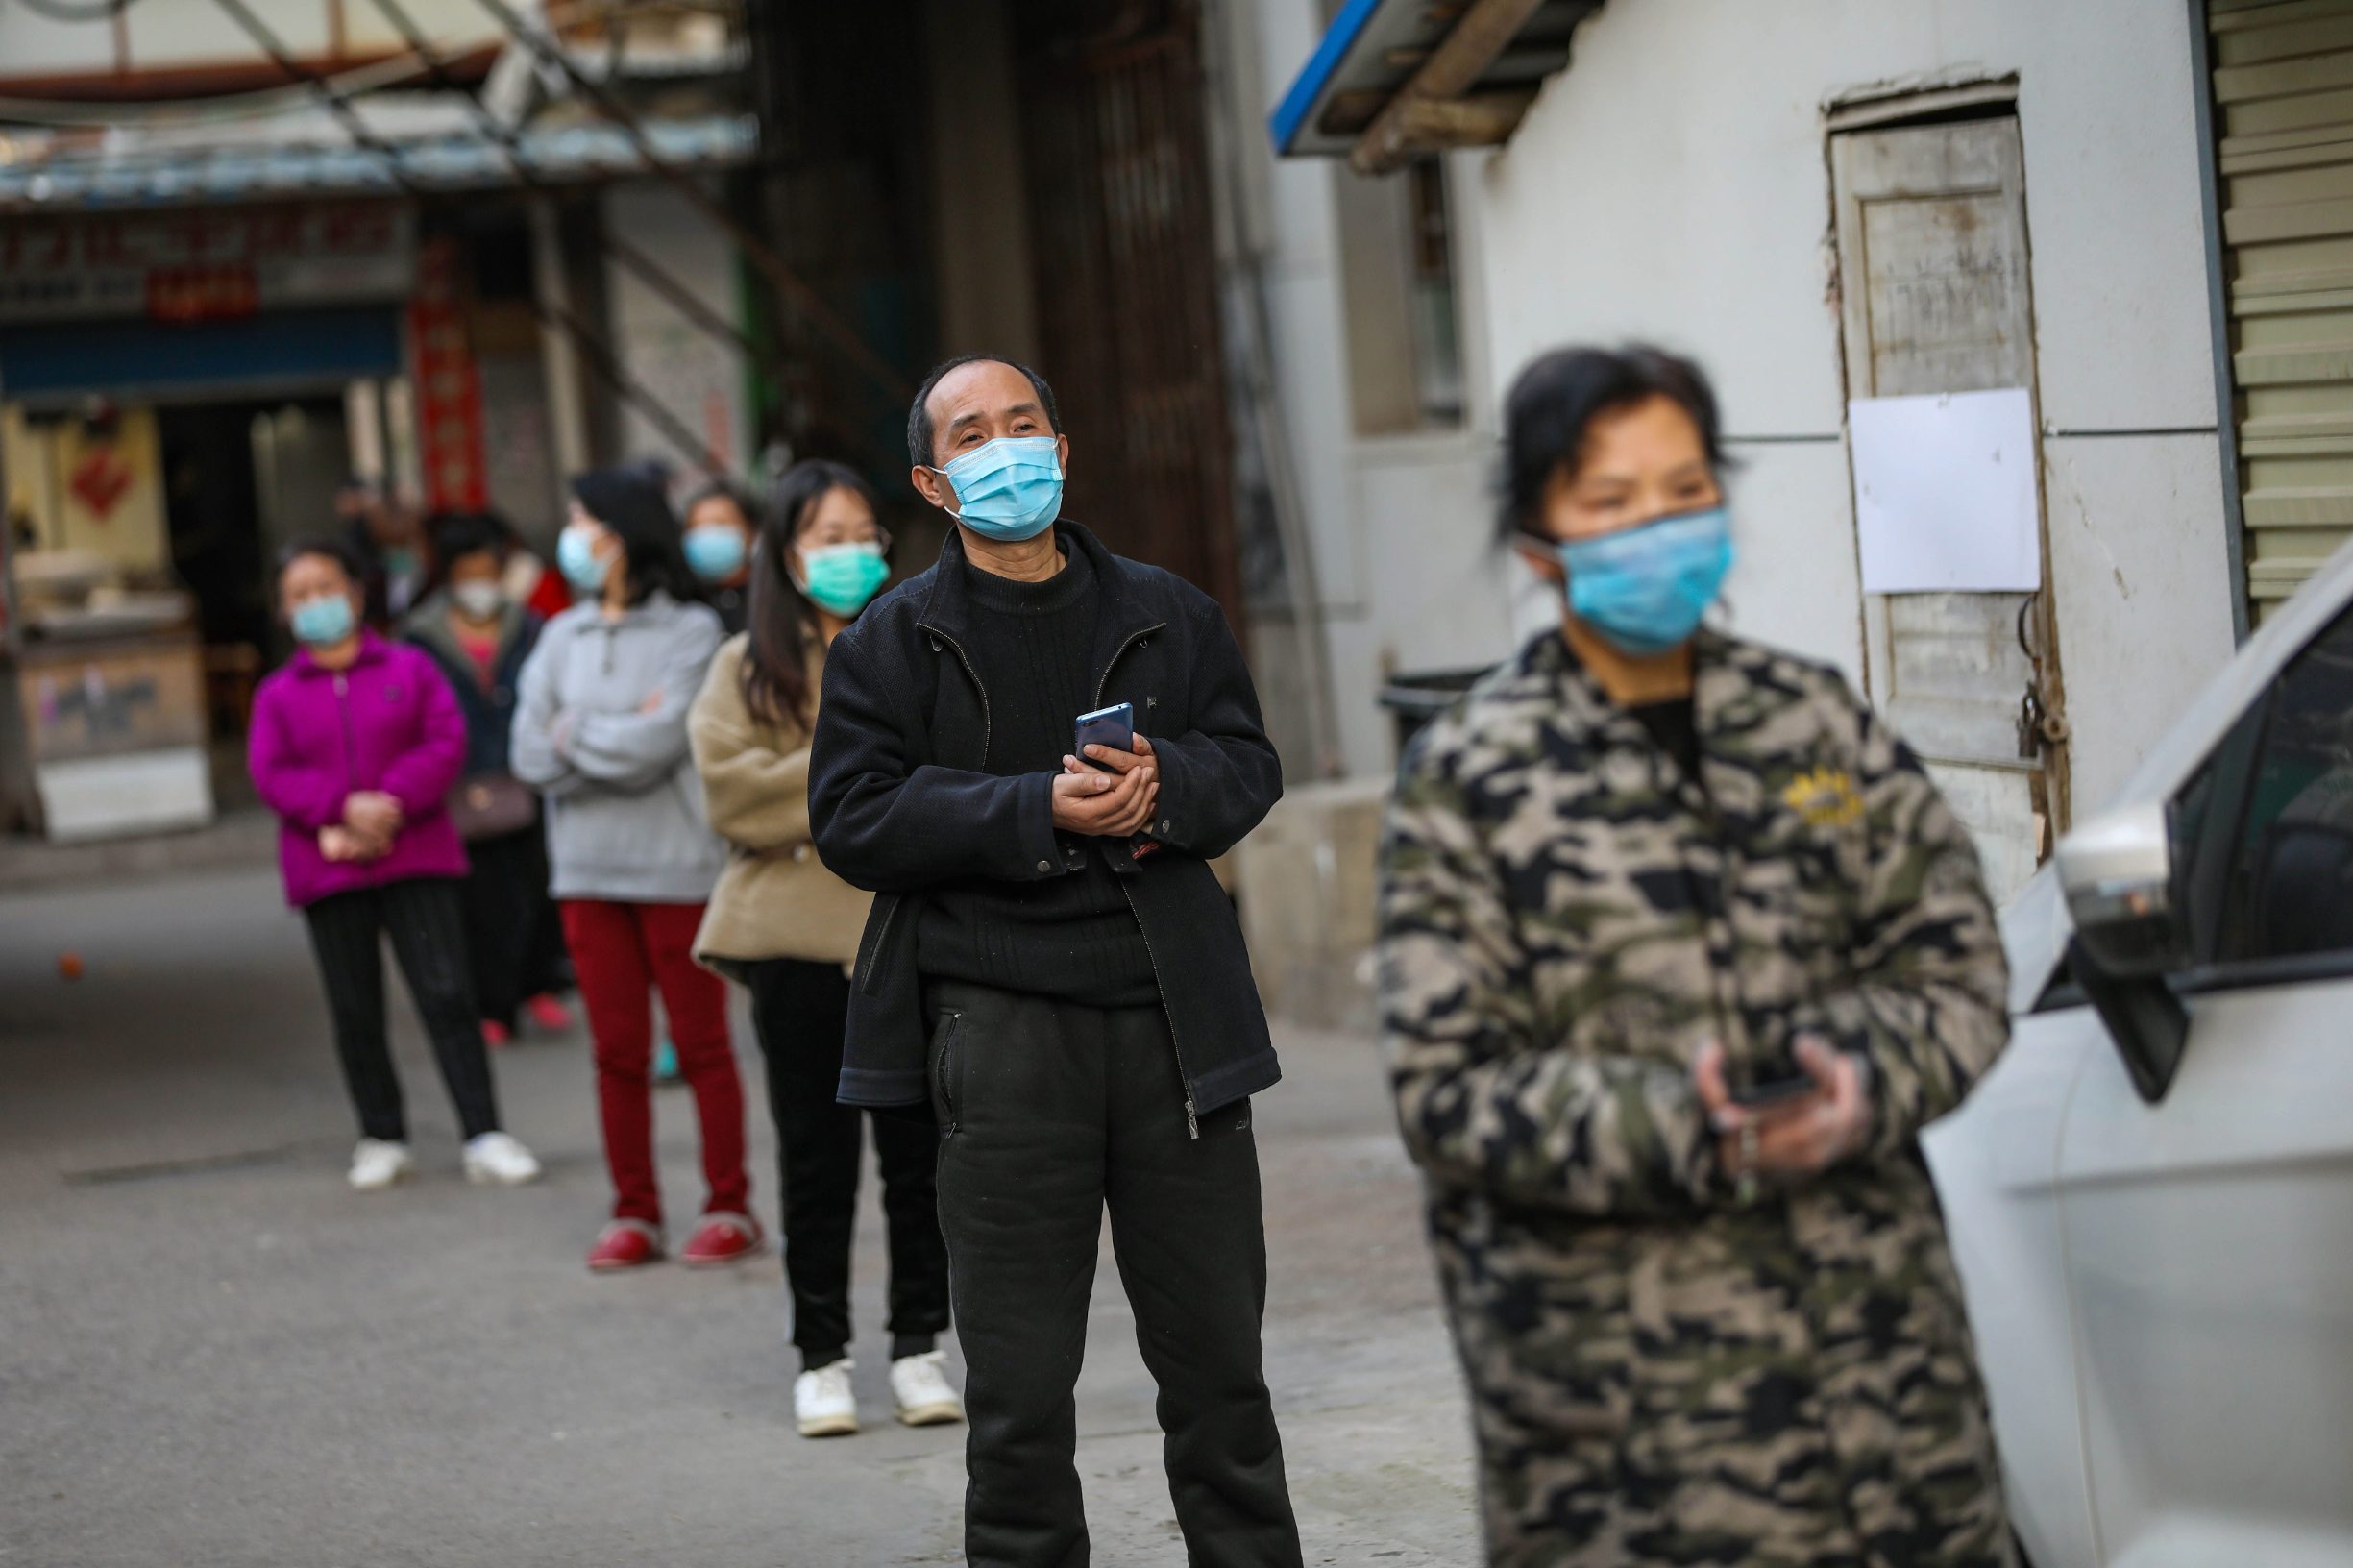 This photo taken on March 18, 2020 shows residents lining up to pick up pork which was delivered to their quarantined compound in Wuhan, in China's central Hubei province. - China on March 19 reported no new domestic cases of the coronavirus for the first time since it started recording them in January, but recorded a spike in infections from abroad. (Photo by STR / AFP) / China OUT